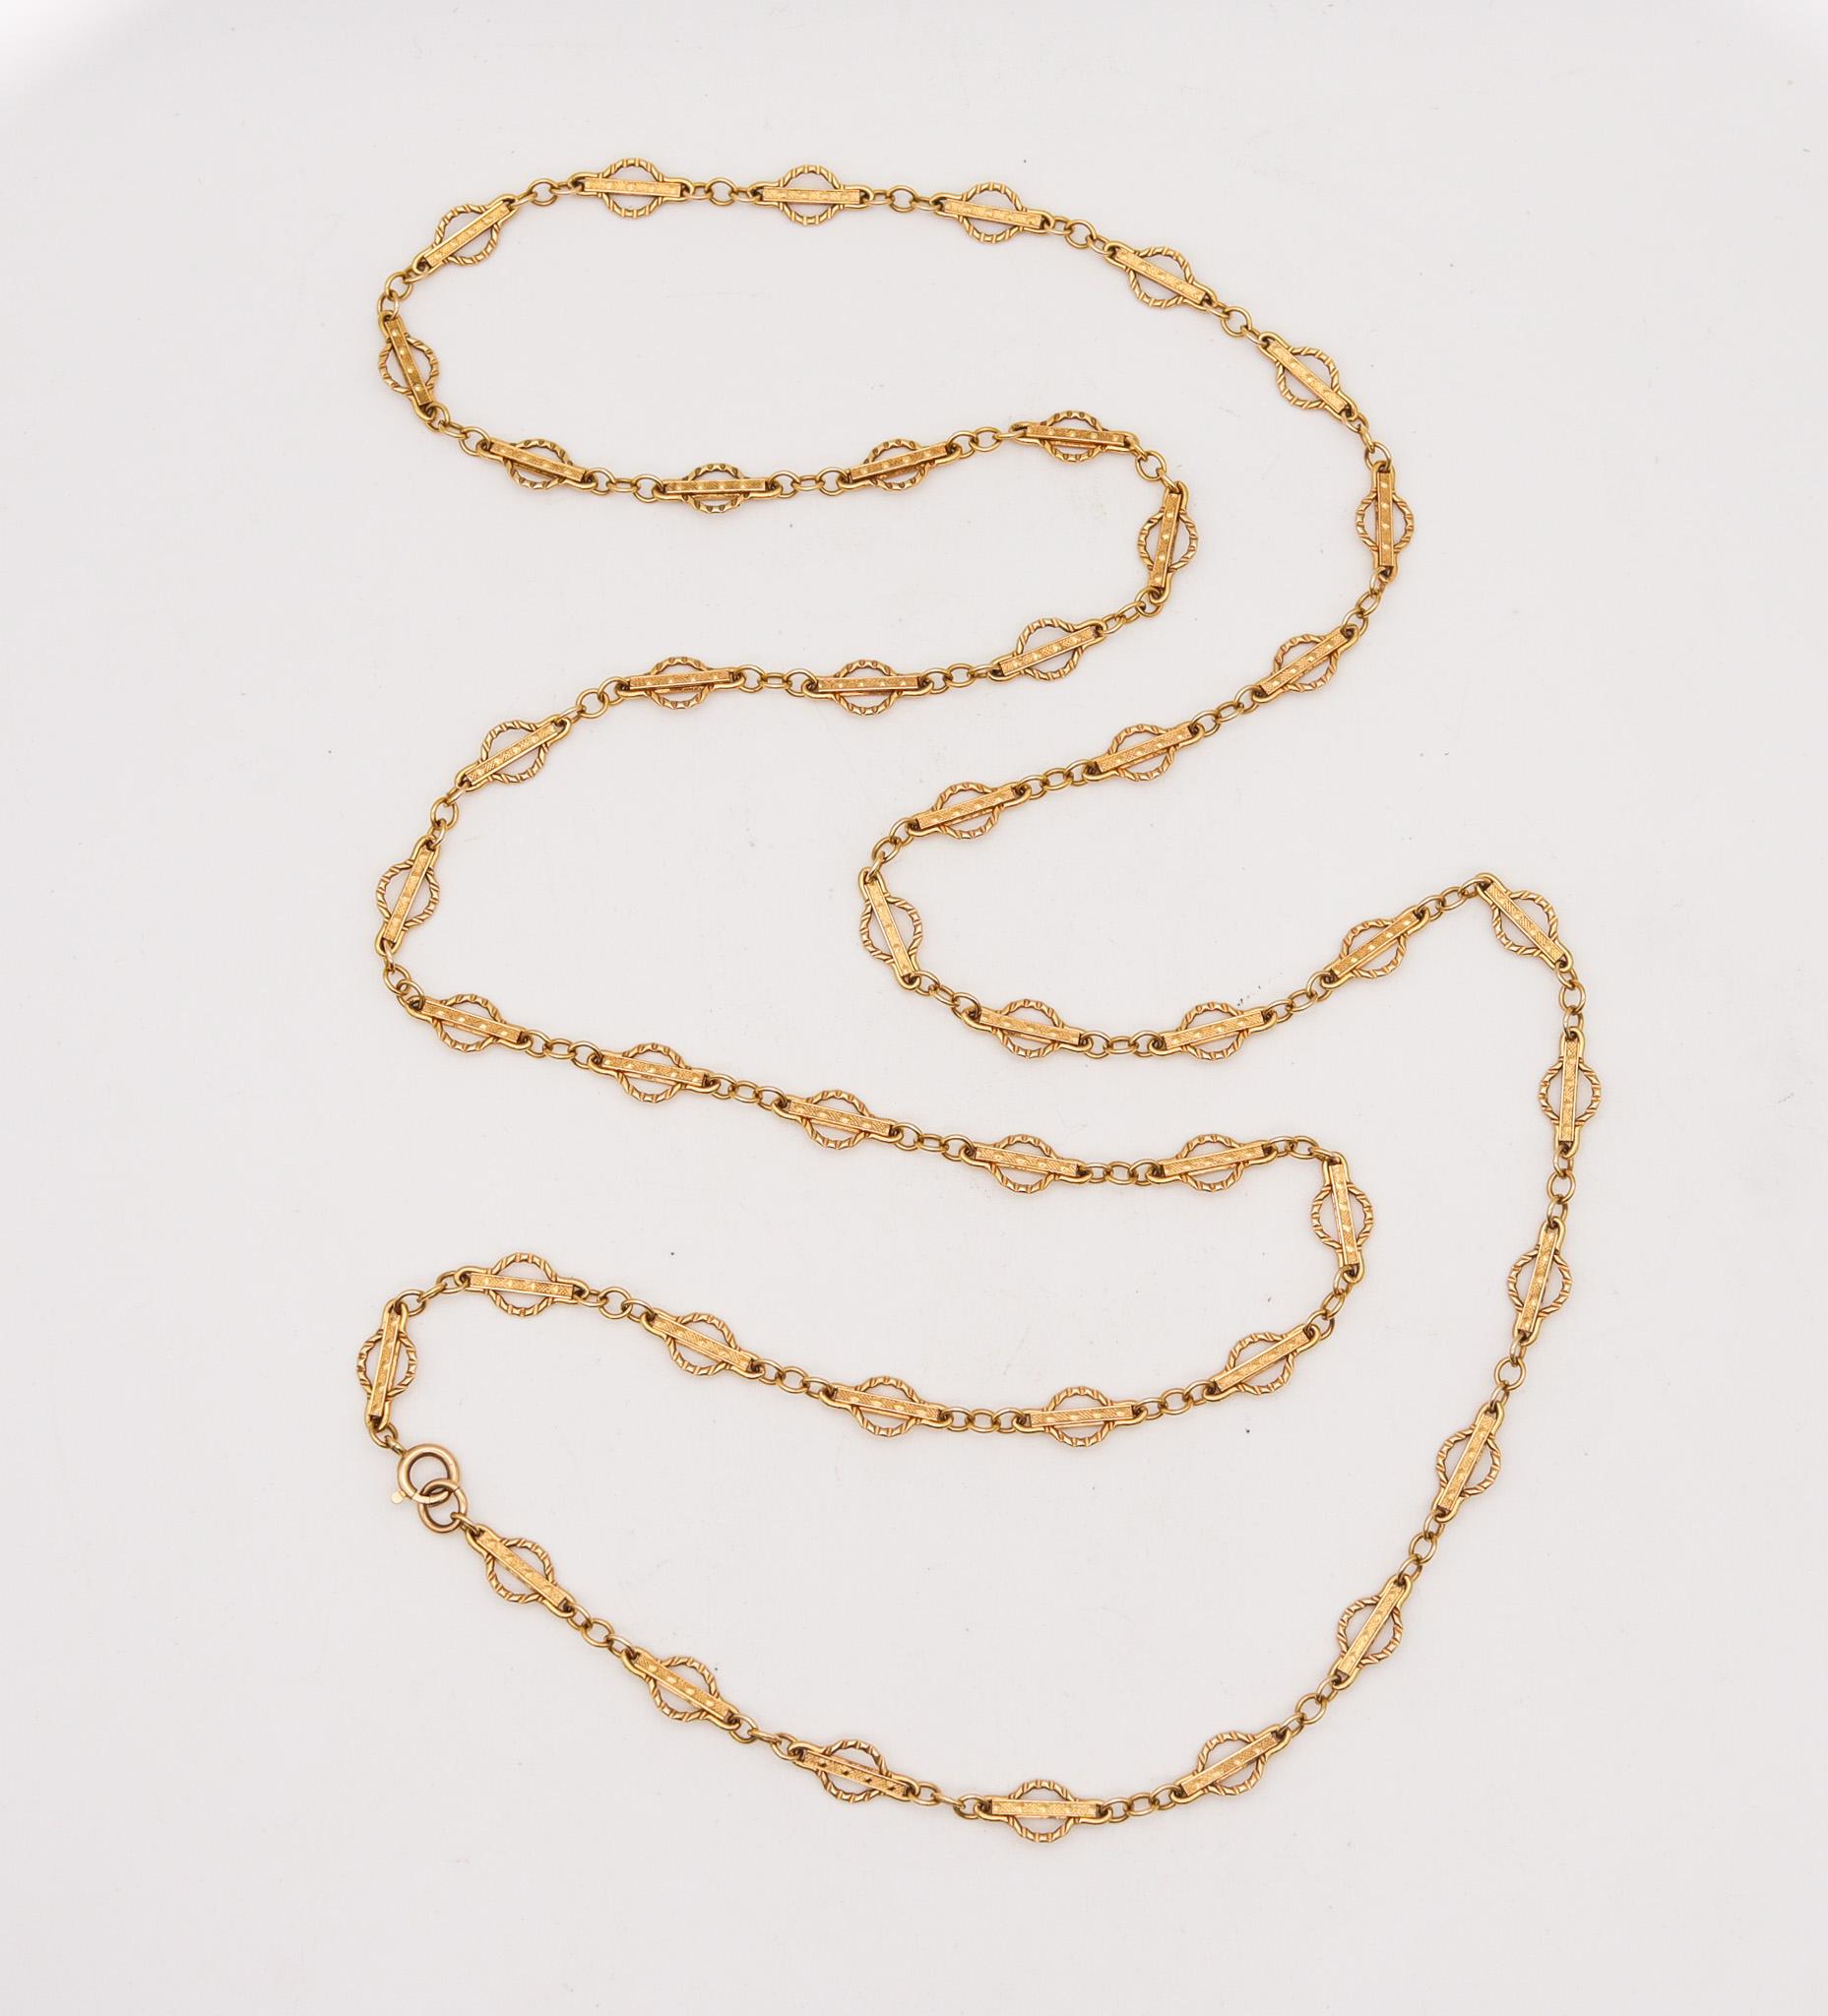 An England chain from the Victorian period.

Very delicate intricate chain, created in England during the Victorian period (1837-1901), back in the 1880. It was carefully crafted with complicated geometric patterns in yellow gold of 14 karats and